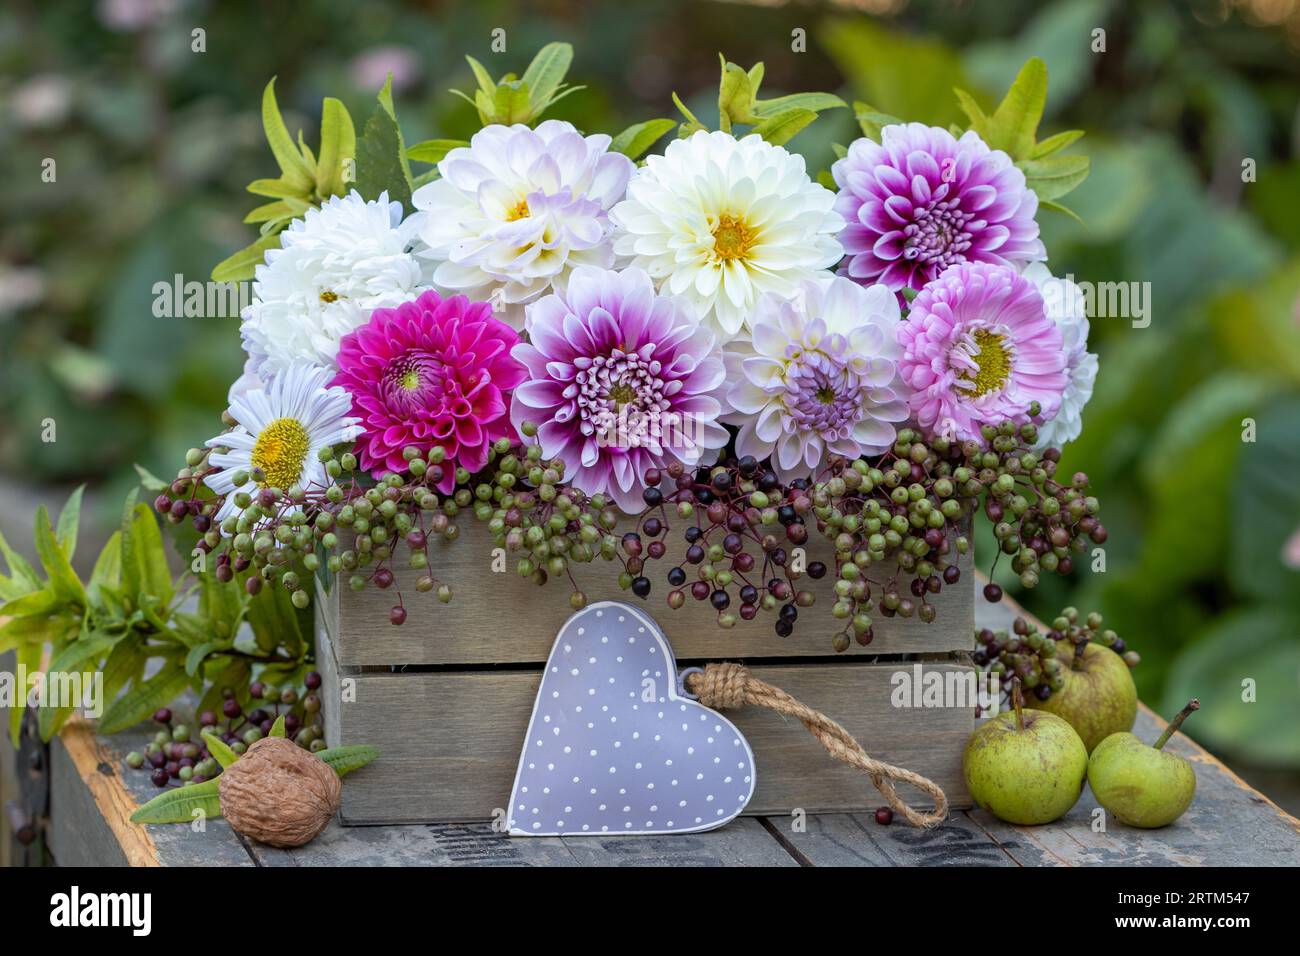 flowers arrangement with pink and white dahlias, asters and elder berries in wooden box Stock Photo